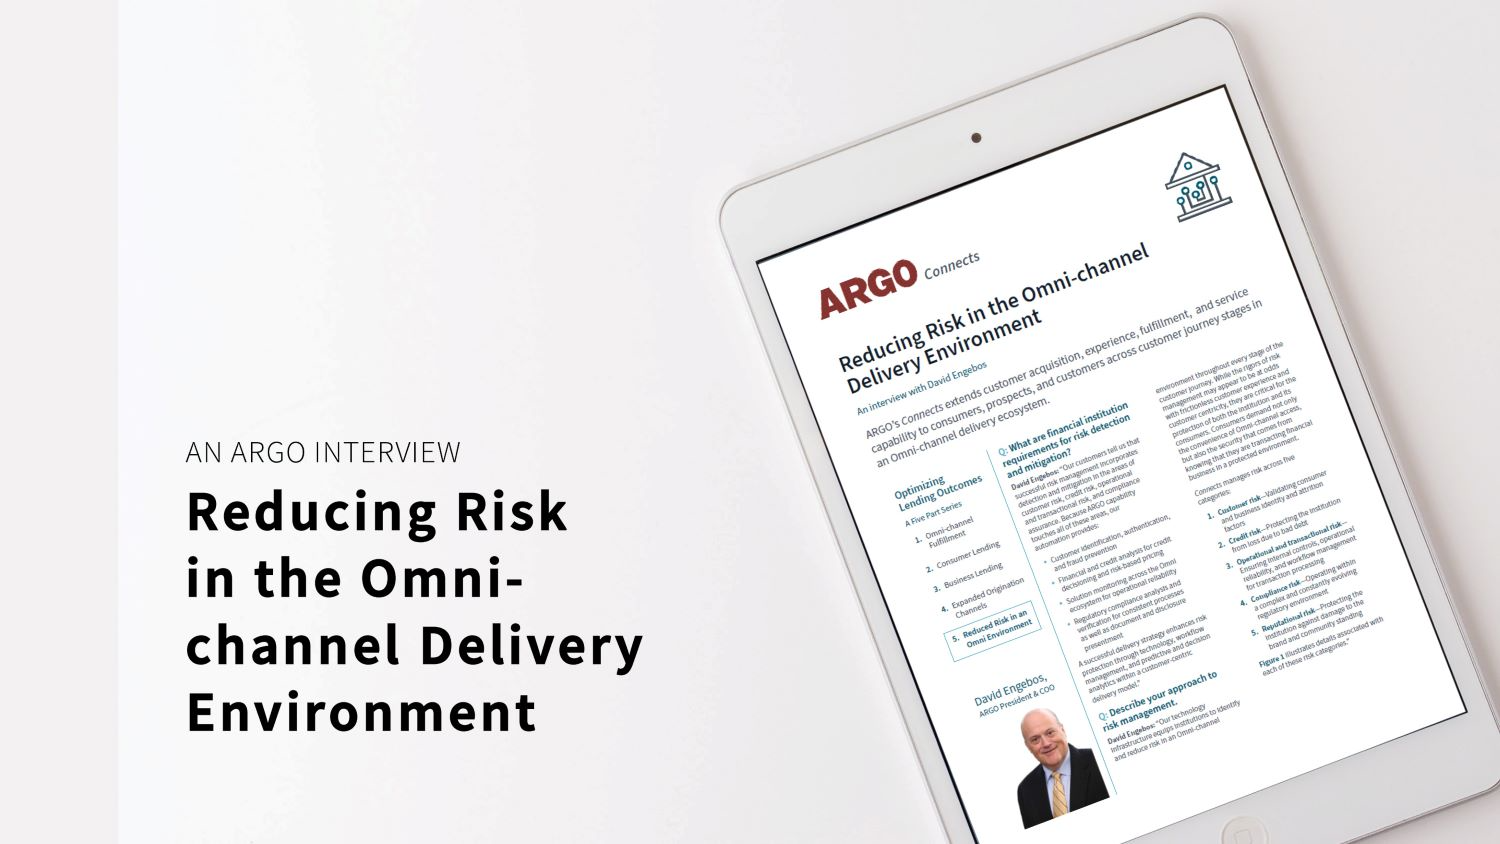 5.Reducing Risk in the Omni-channel Delivery Environment 042922 - RESIZED[37]